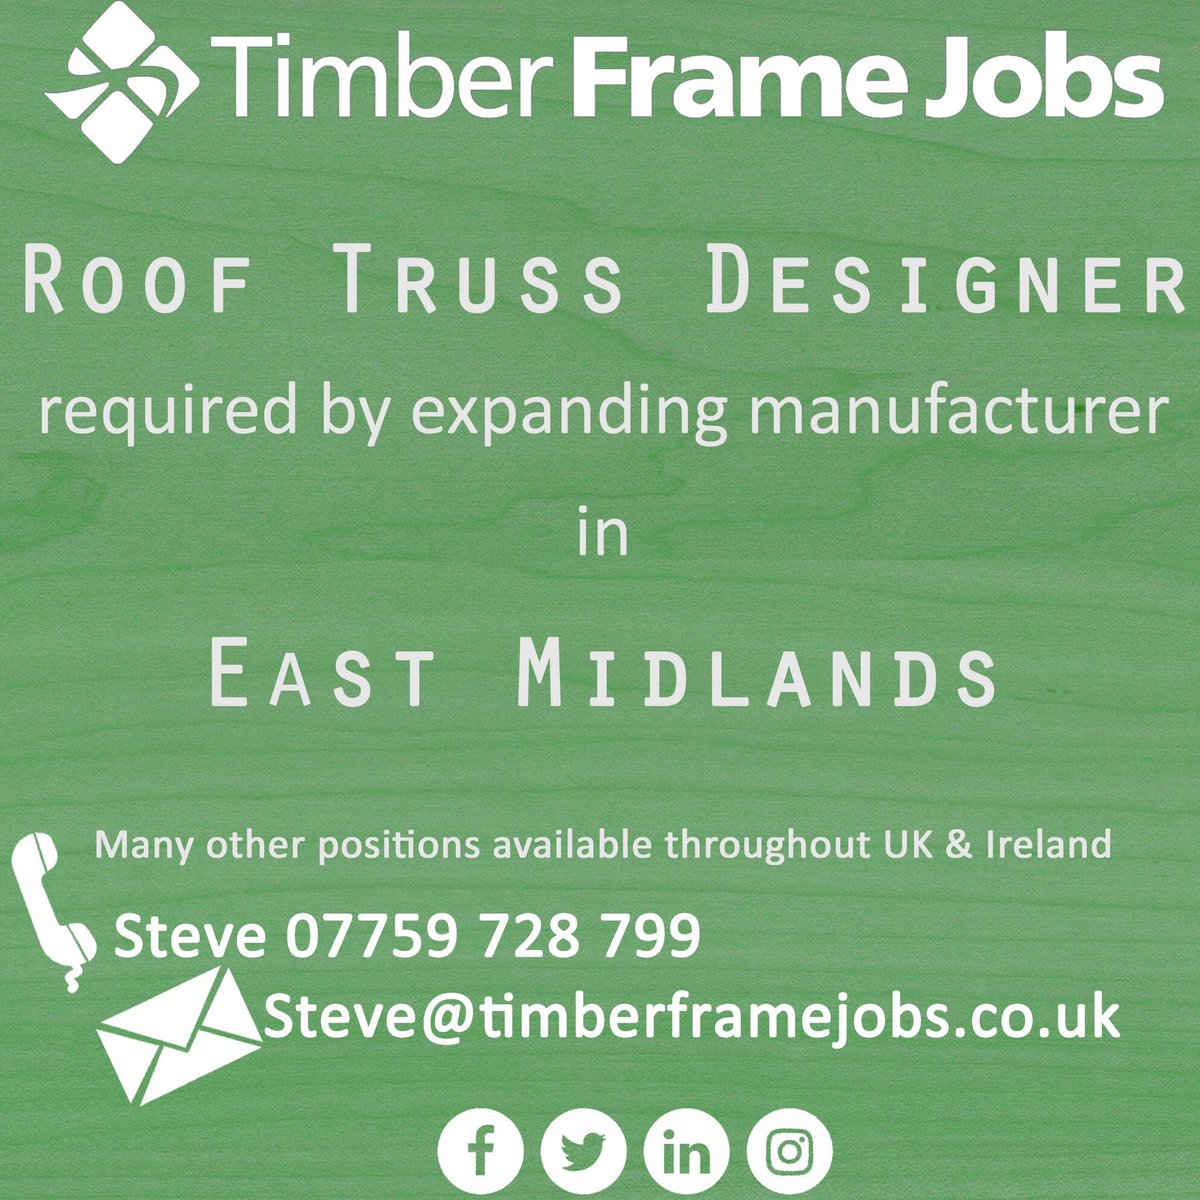 #RoofTruss designer required by this expanding #TimberEngineering manufacturer in #EastMidlands . Many more #TimberFrameJobs available throughout UK and IRE #TimberEngineeringJobs #TimberFrame #RoofTrussDesigner #TimberFrameDesigner #Midlands #EastMidlandsJobs #MidlandsJobs